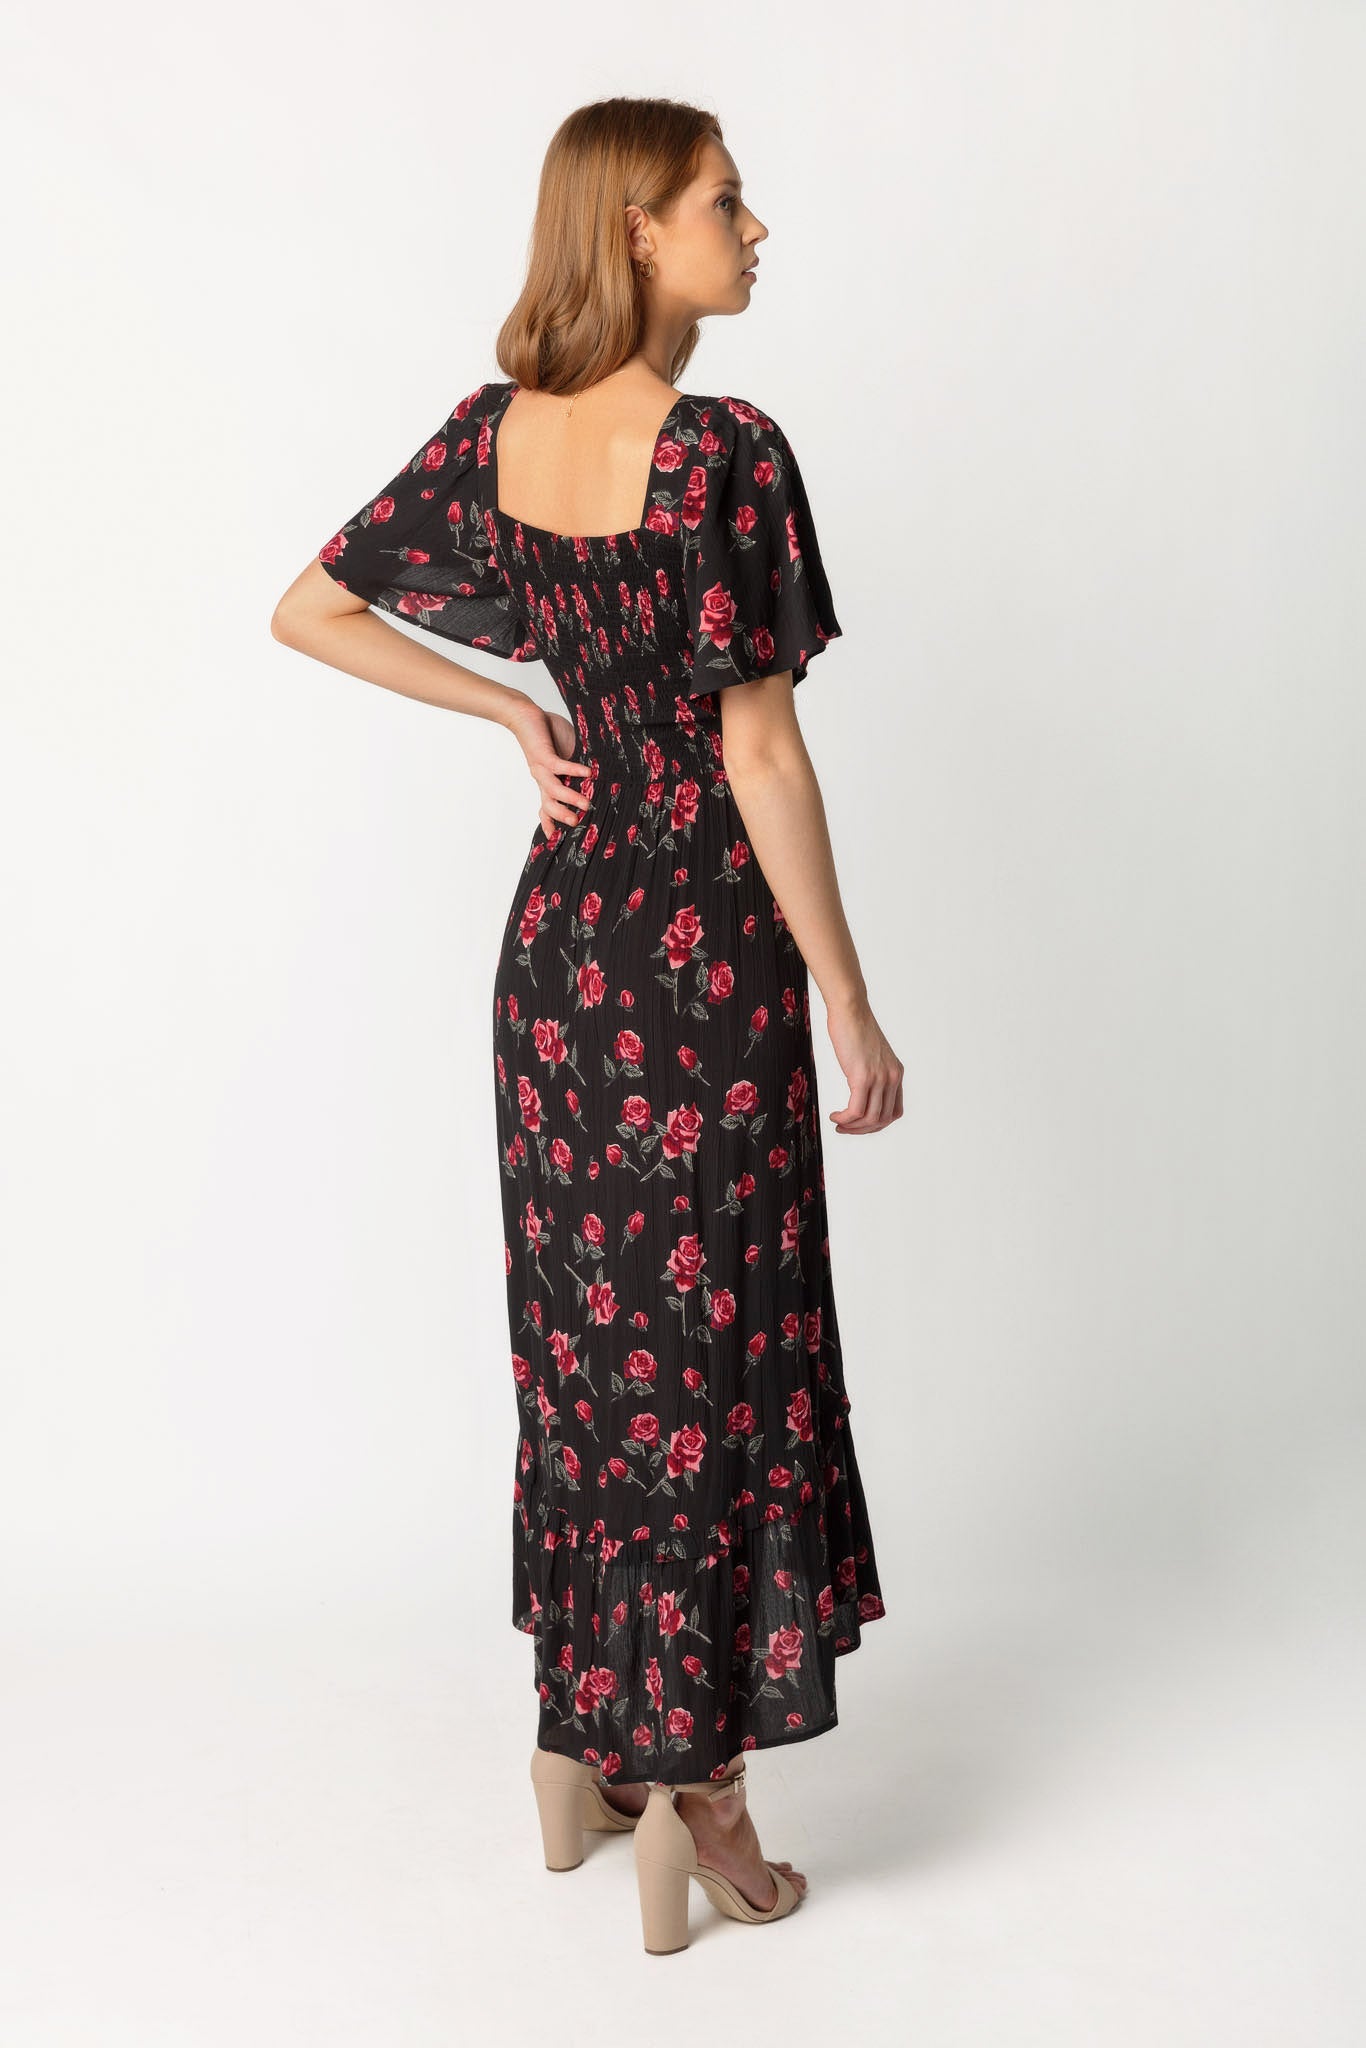 Roses Bell Sleeve Knotted Bust High Low Dress